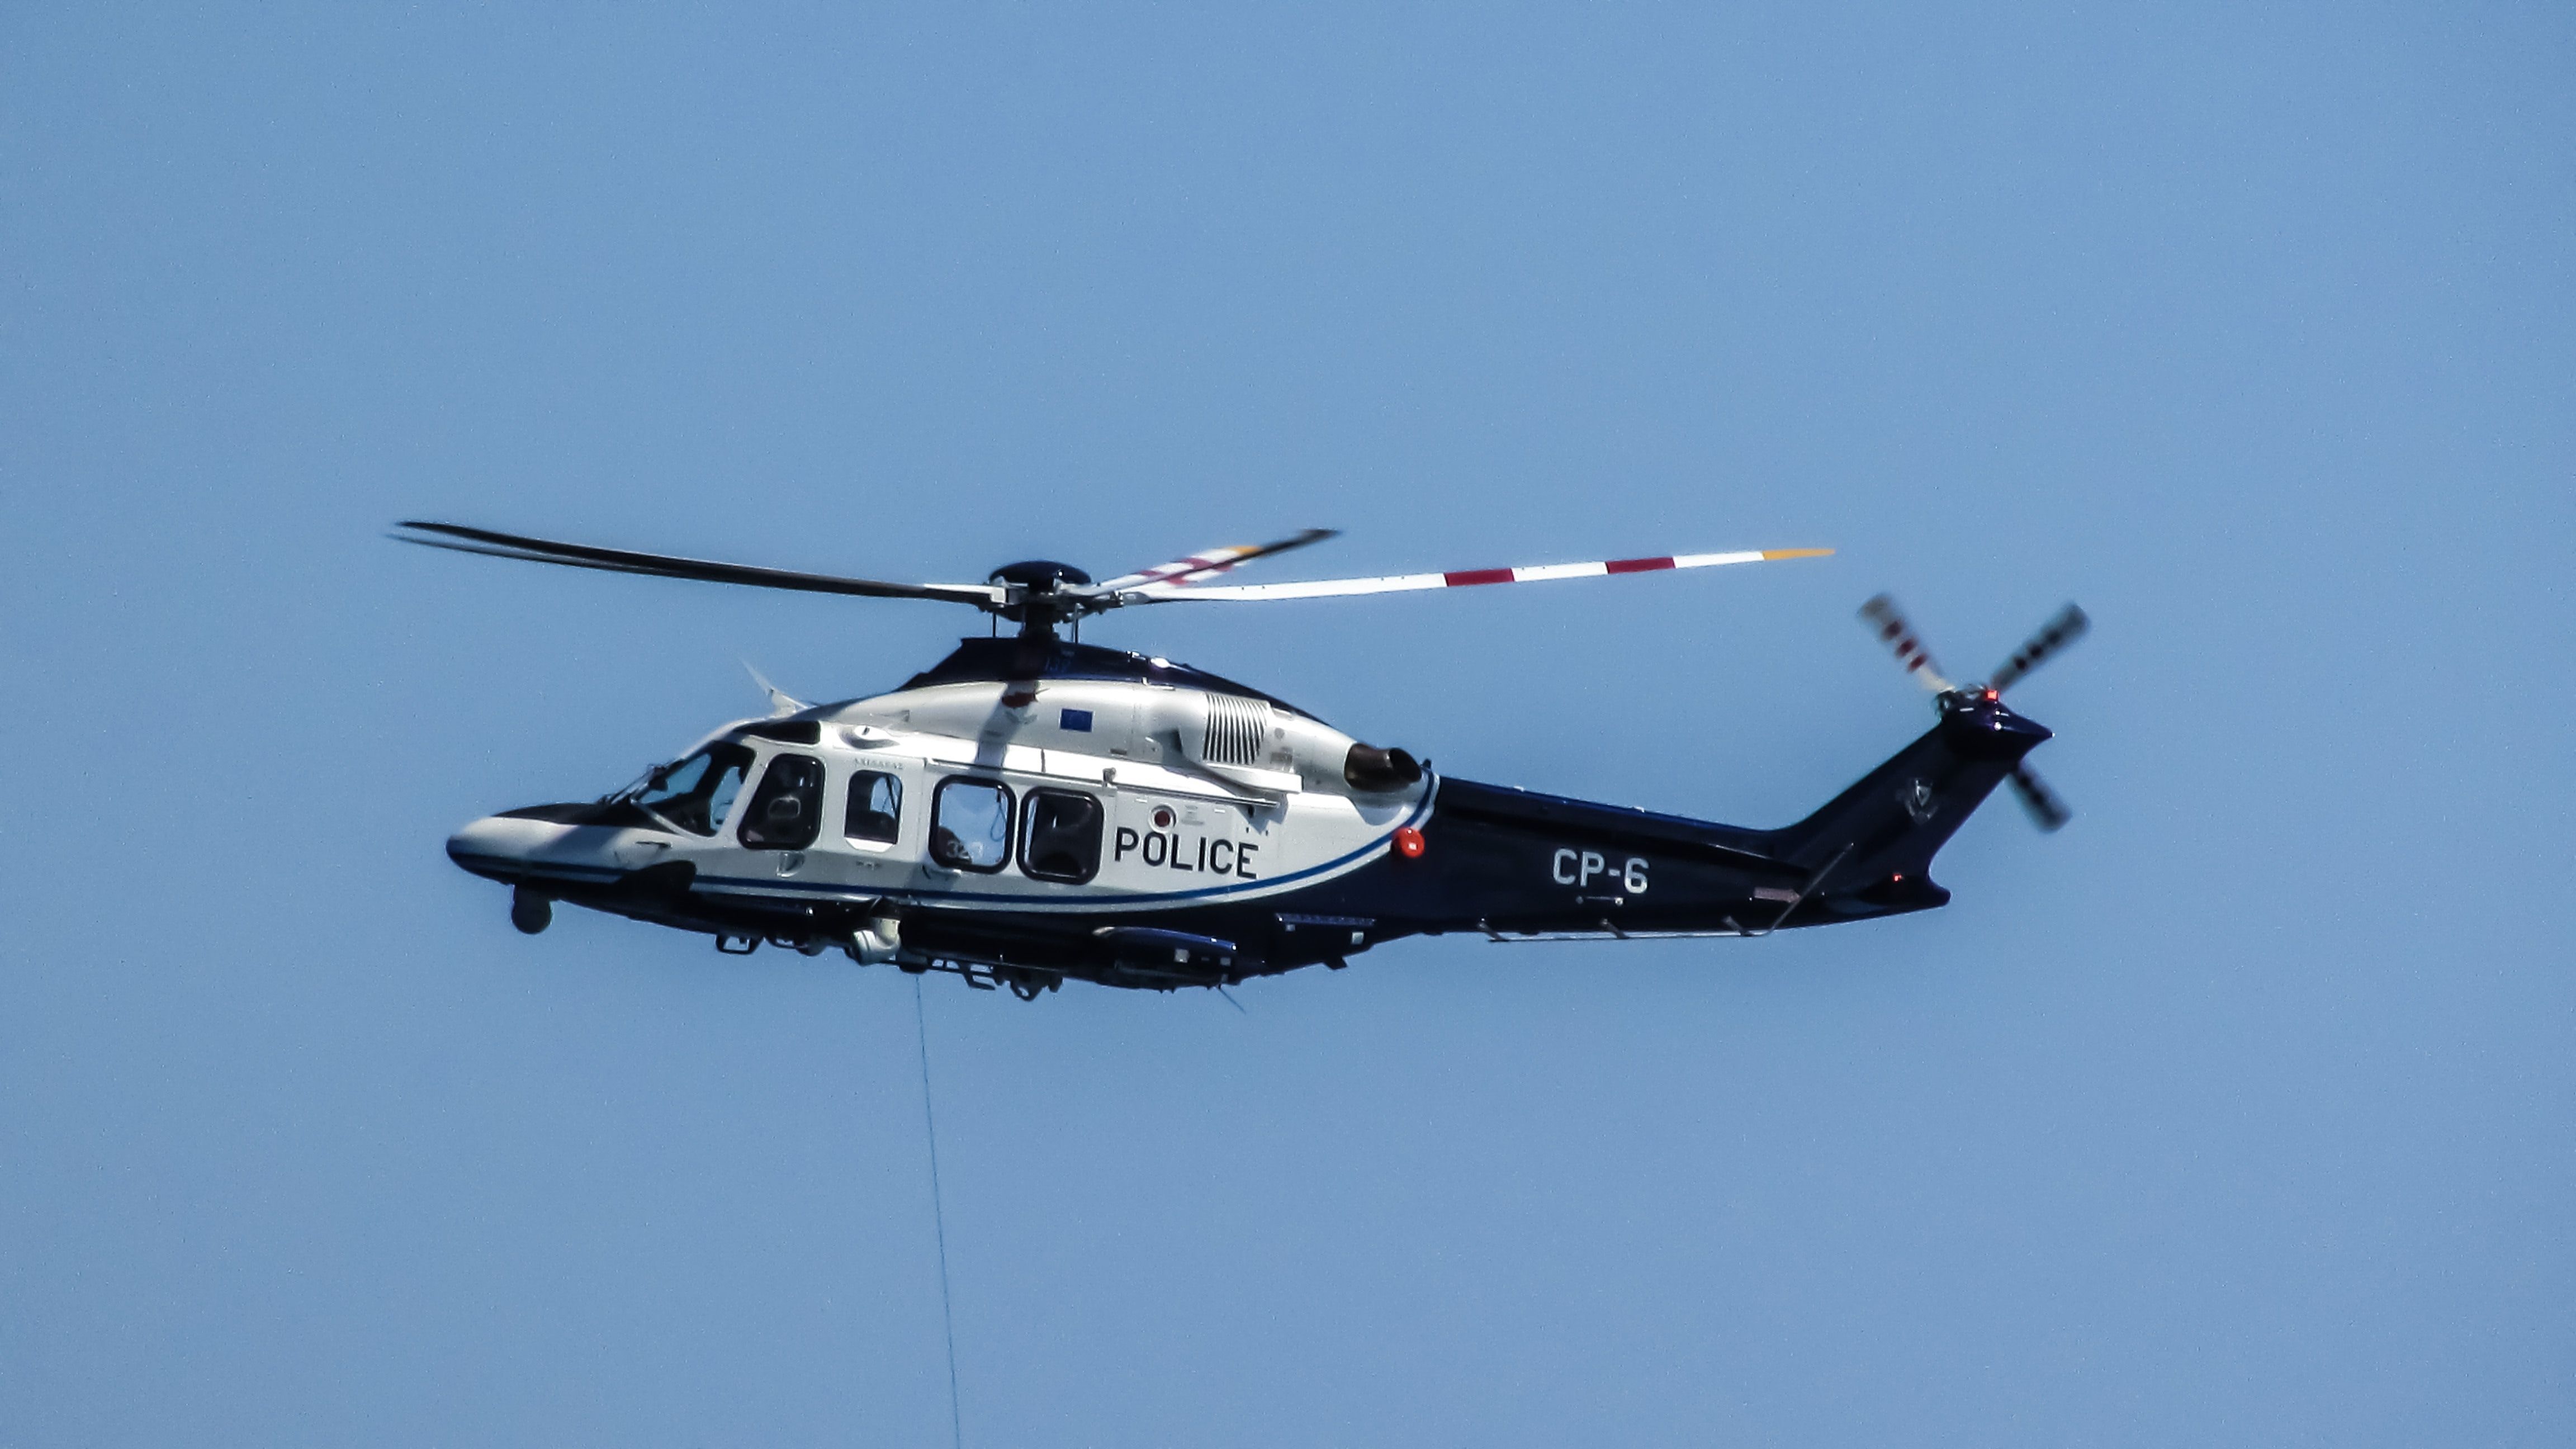 white and black police helicopter free image